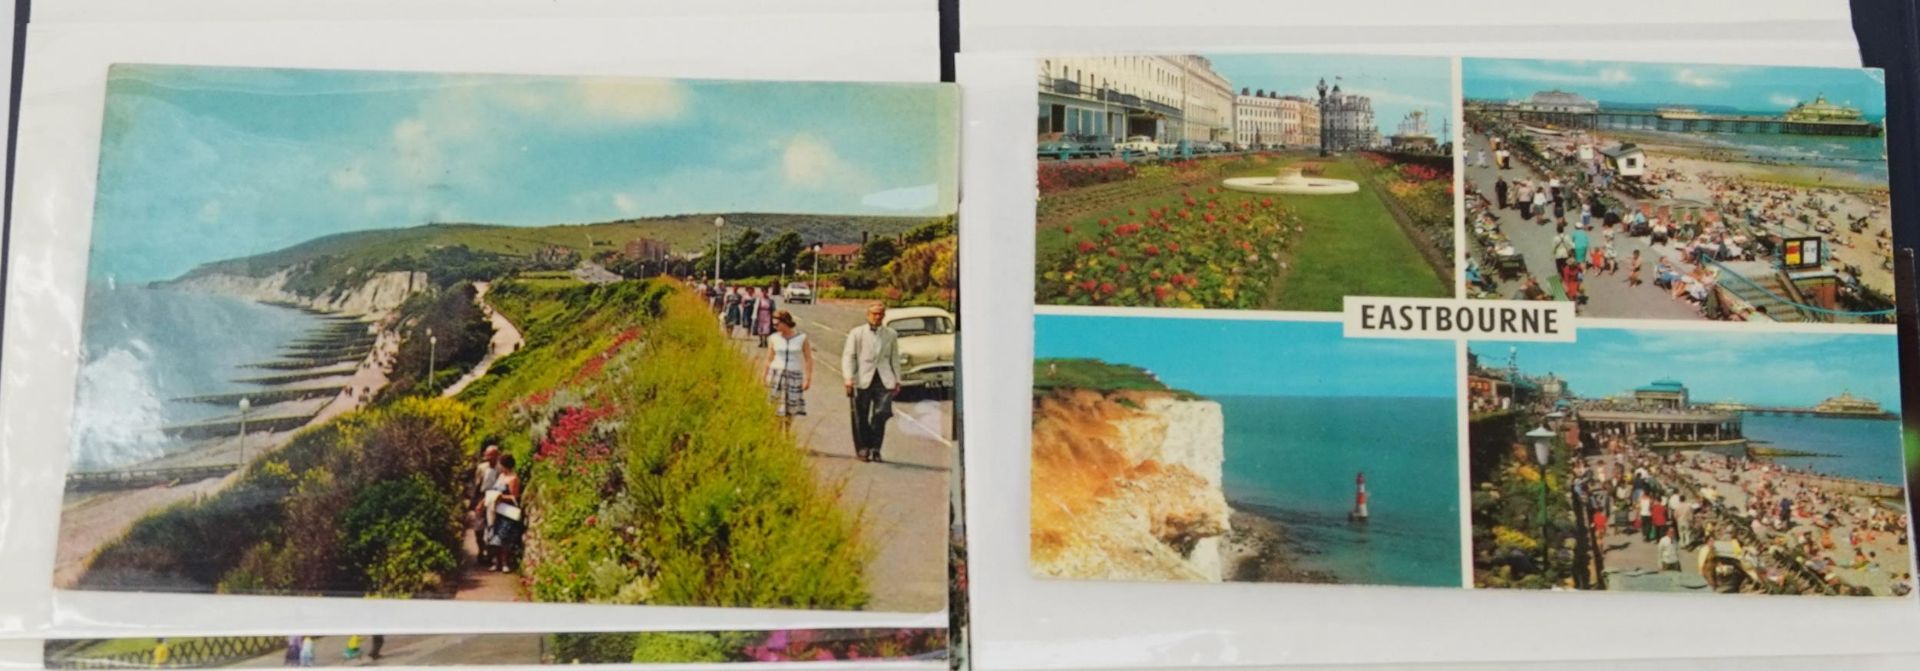 Collection of Eastbourne postcards arranged in two albums including Holywell : For further - Image 10 of 14